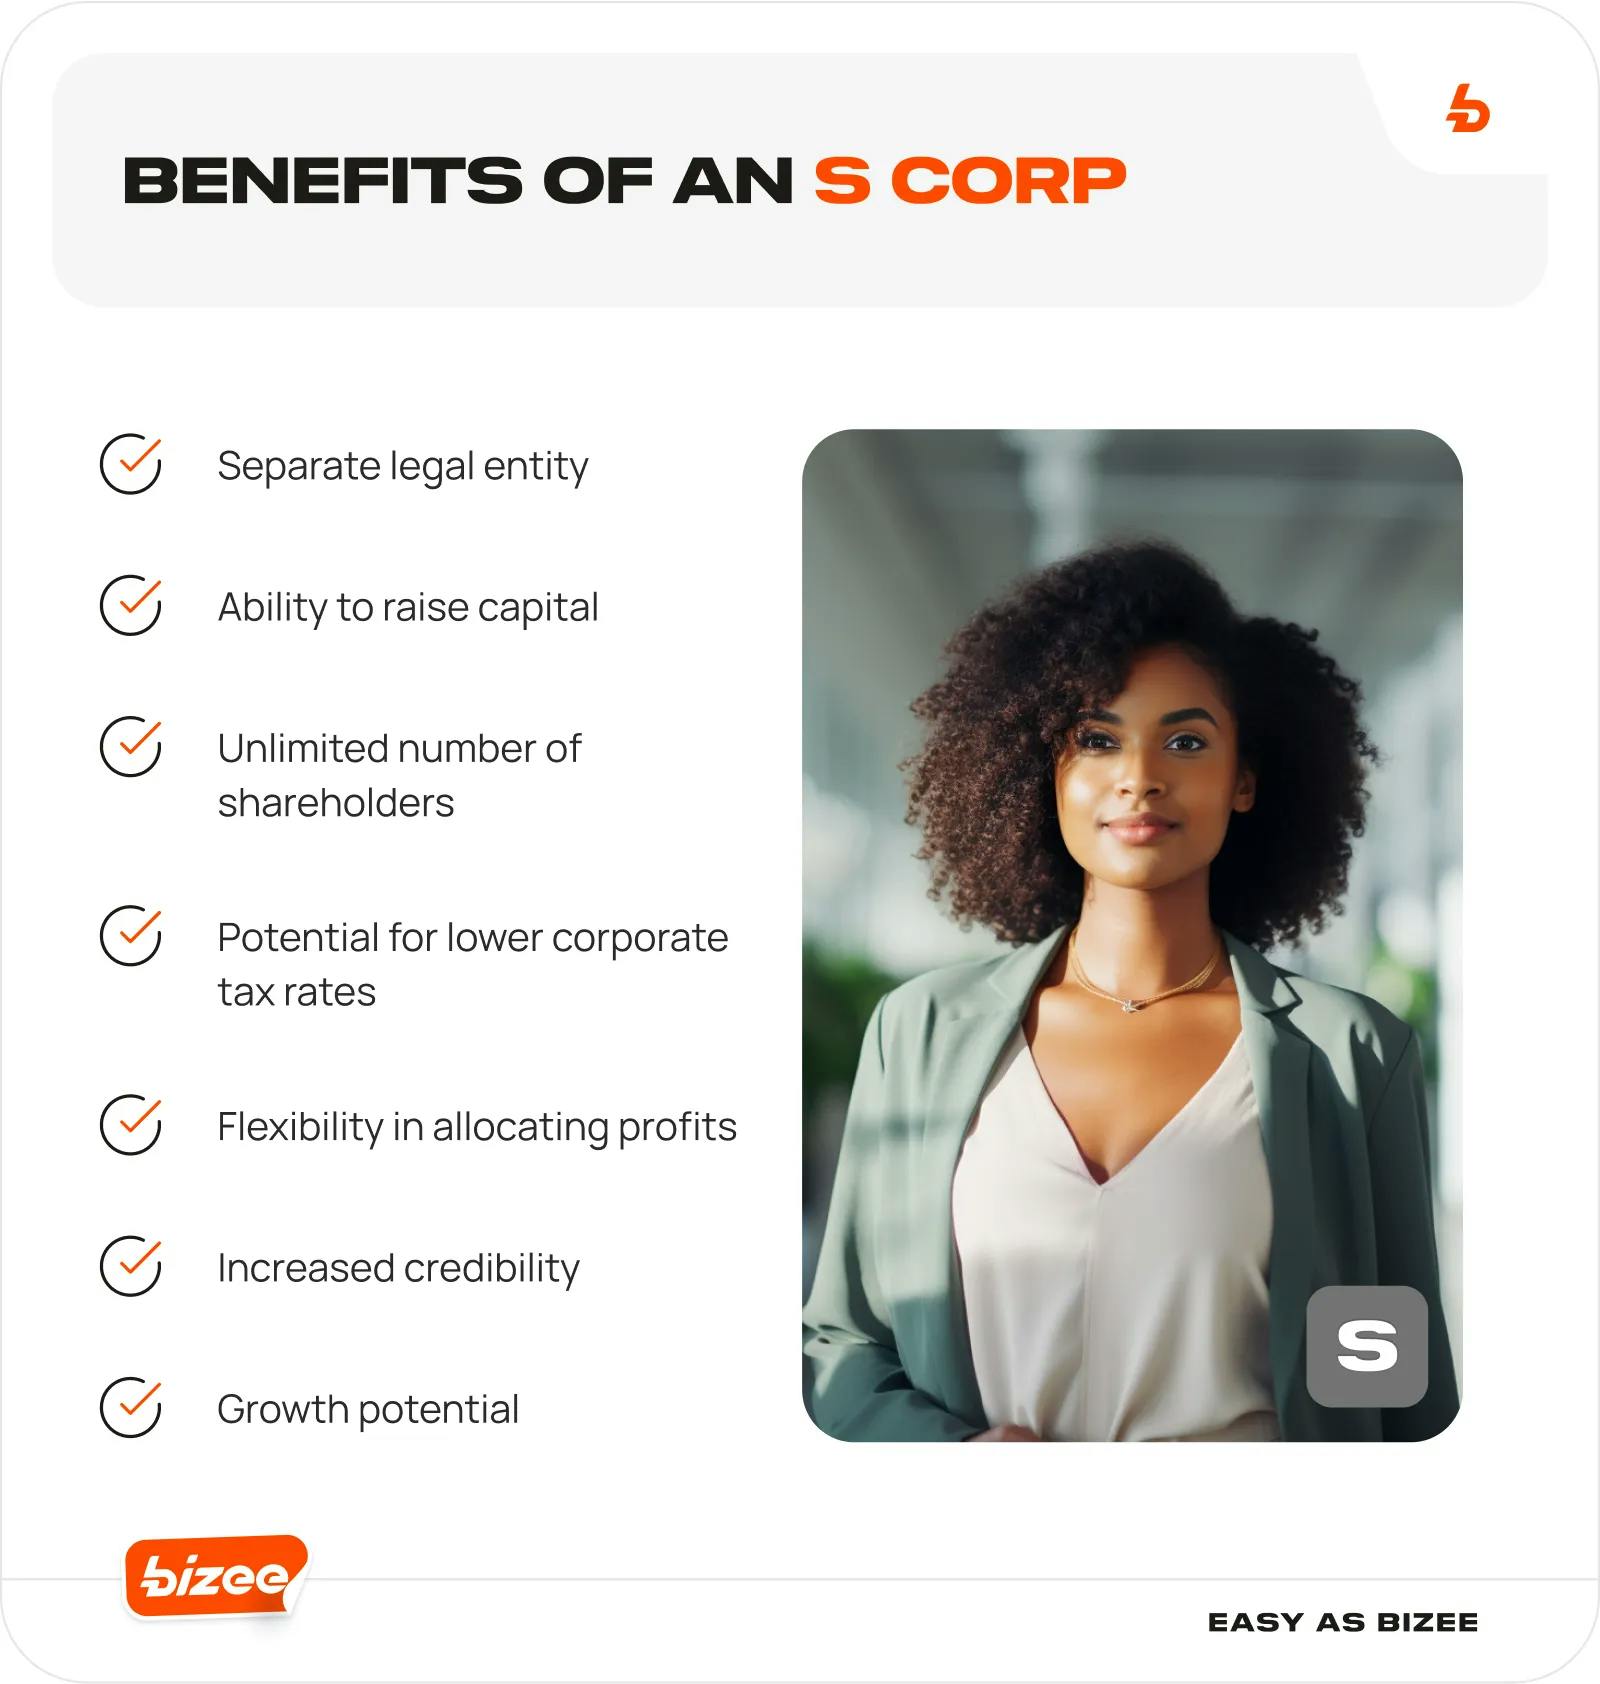 Benefits of an S Corps